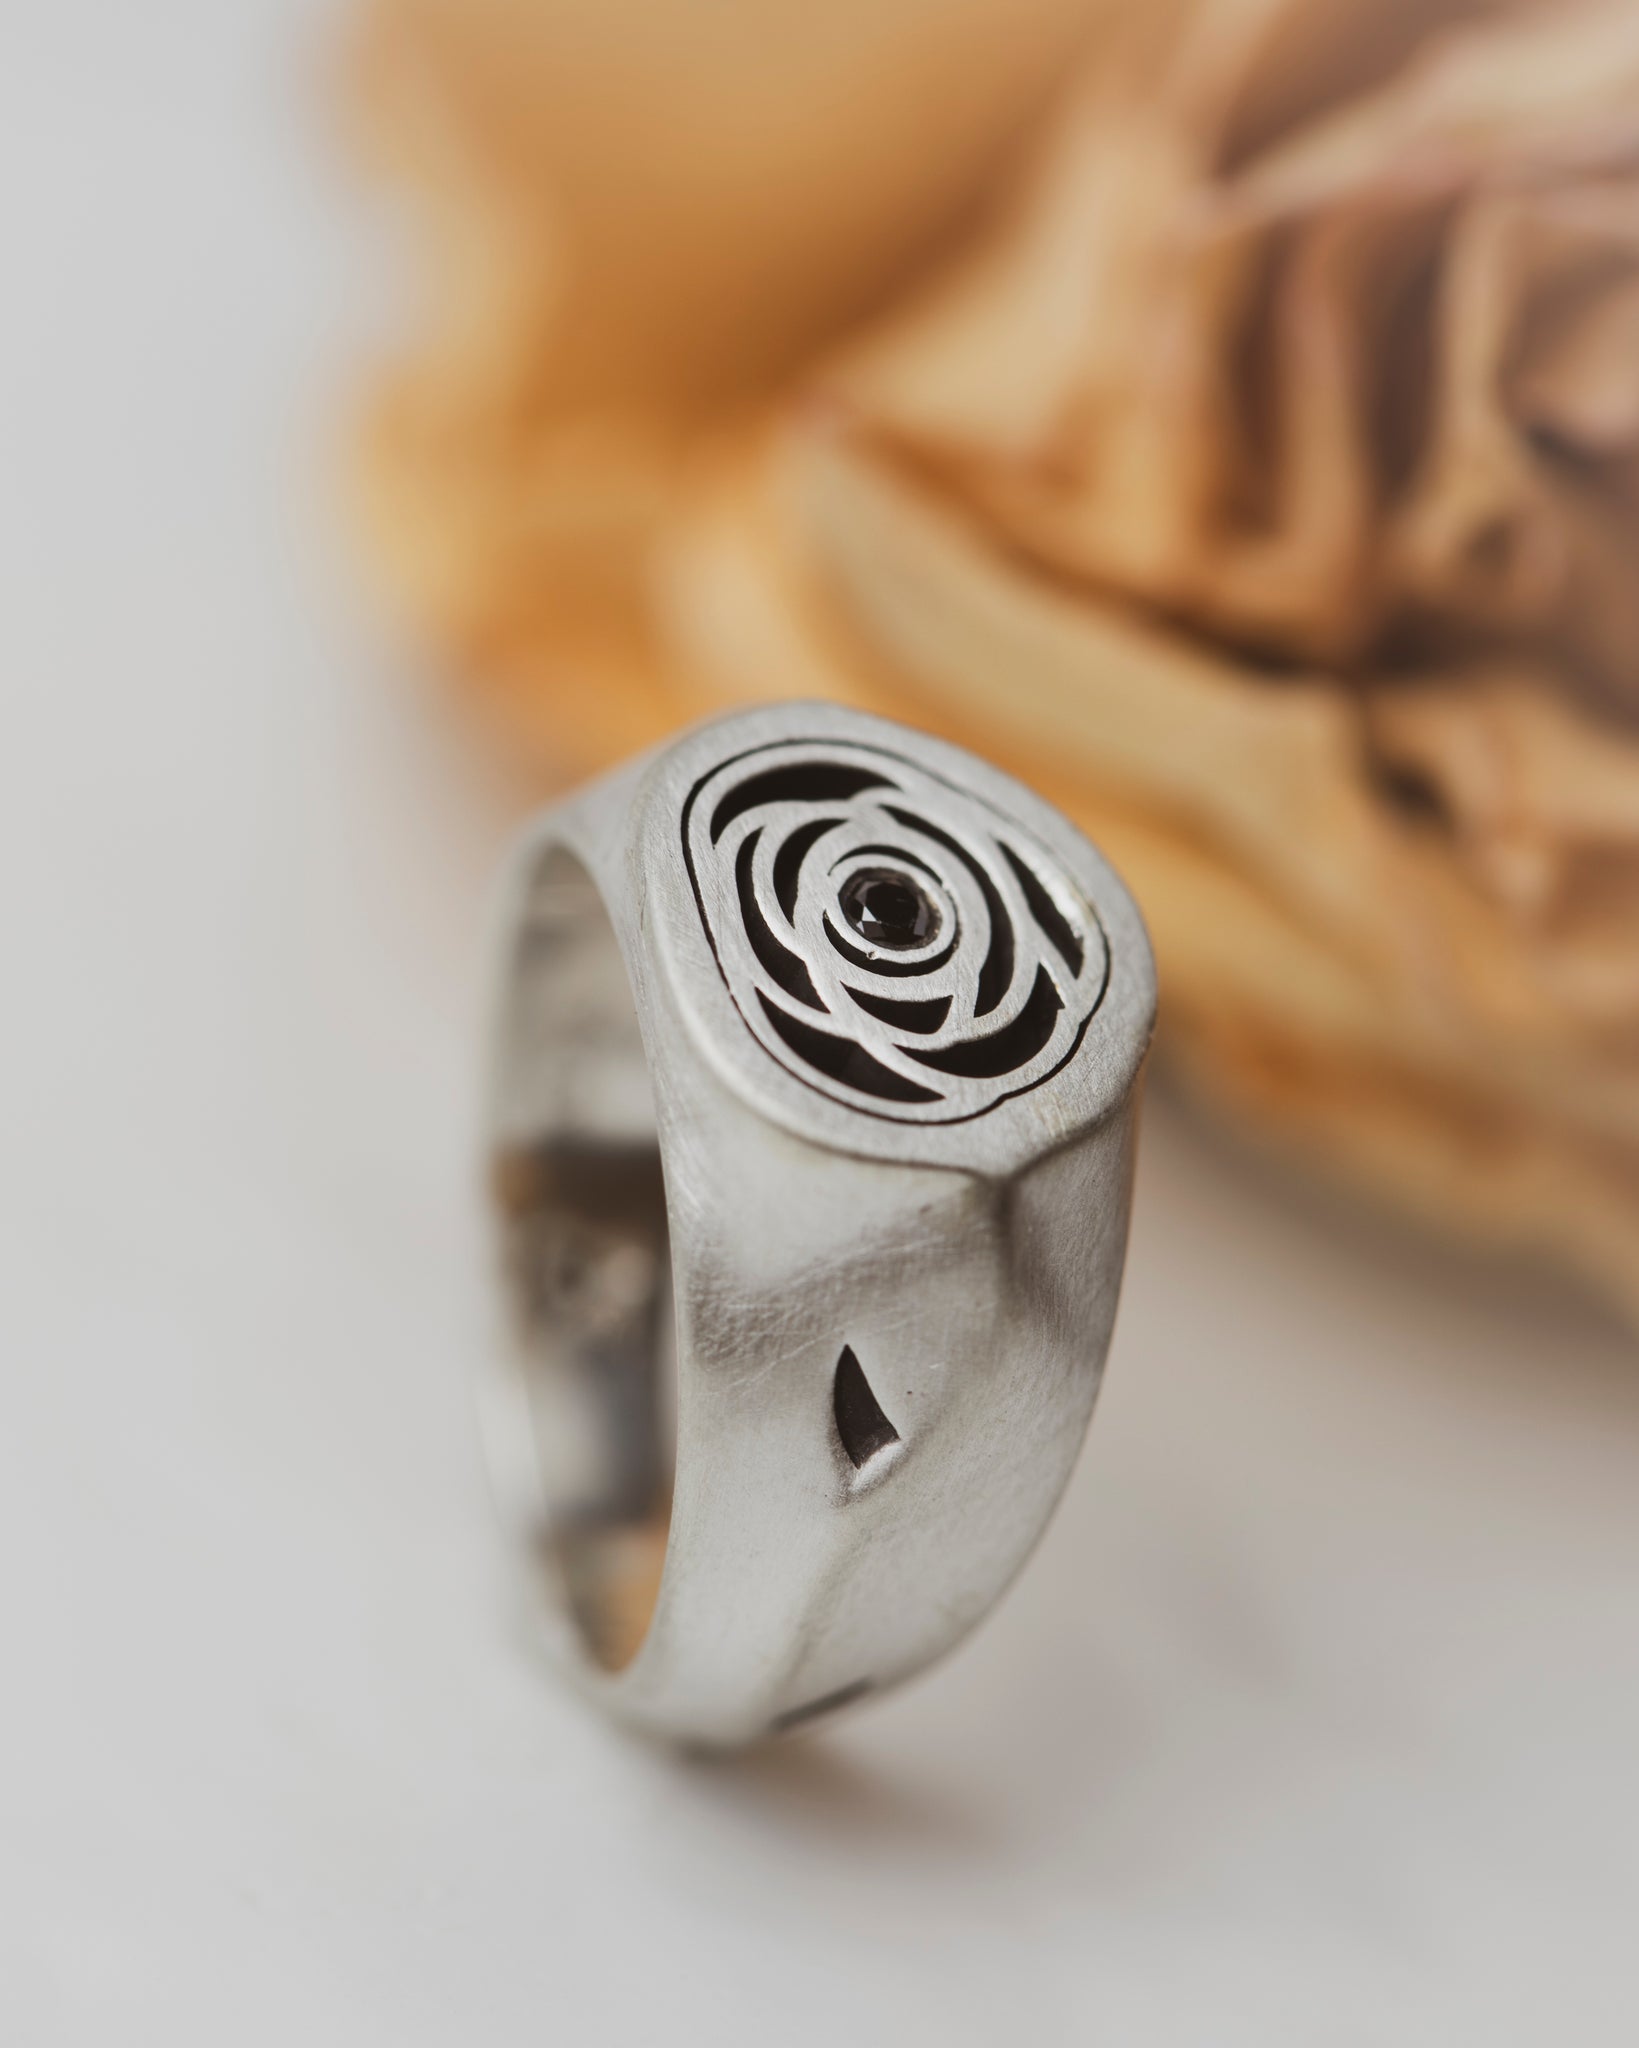 Rose Signet Ring with a Black Diamond center. The band has asymmetric shaping, giving it an organic feel. It even has thorns--where portions of the metal have been carved and oxidized.